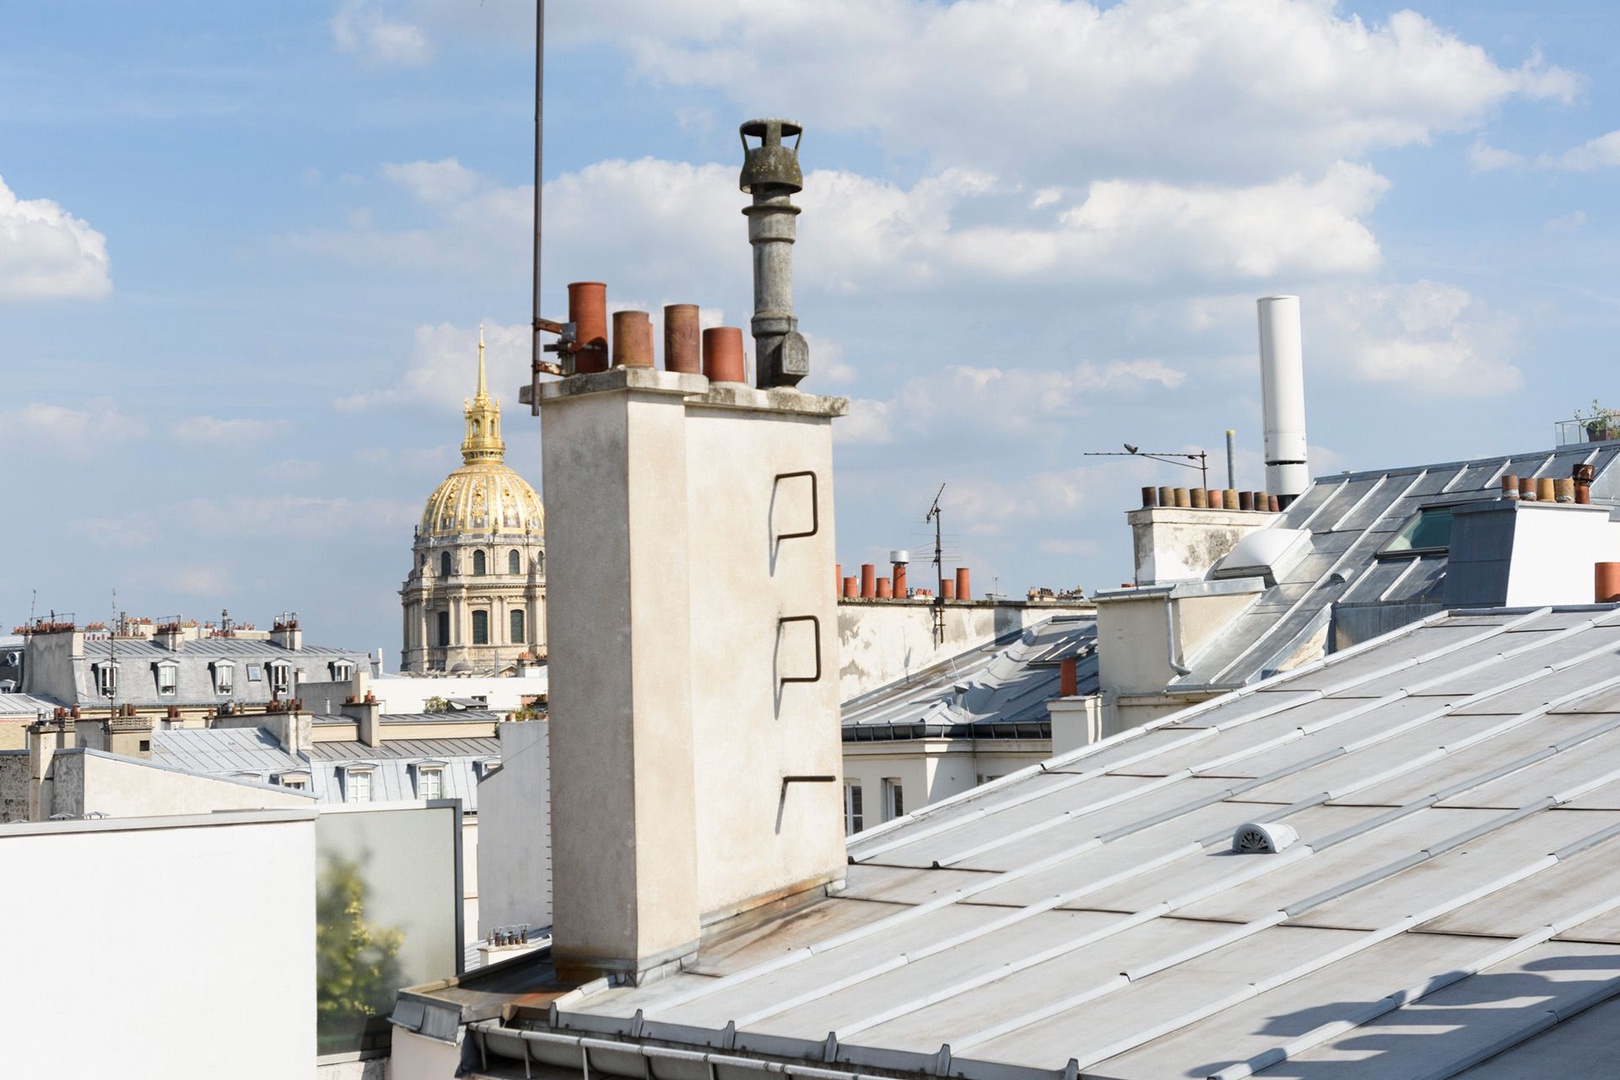 Enjoy the view of Parisian rooftops and Les Invalides.